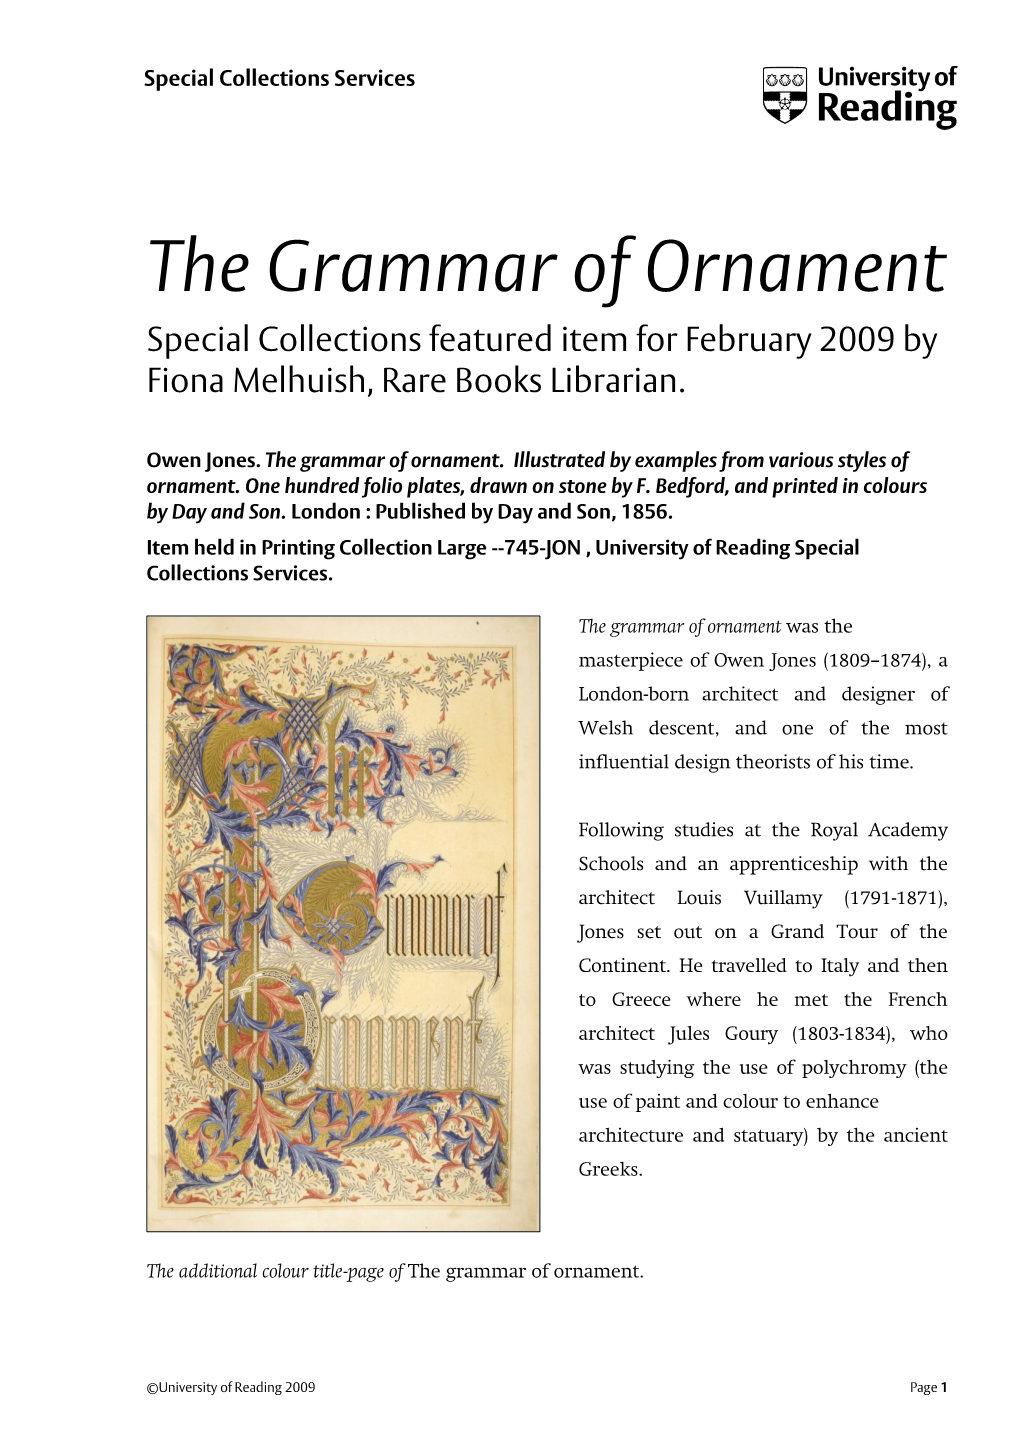 The Grammar of Ornament Special Collections Featured Item for February 2009 by Fiona Melhuish, Rare Books Librarian